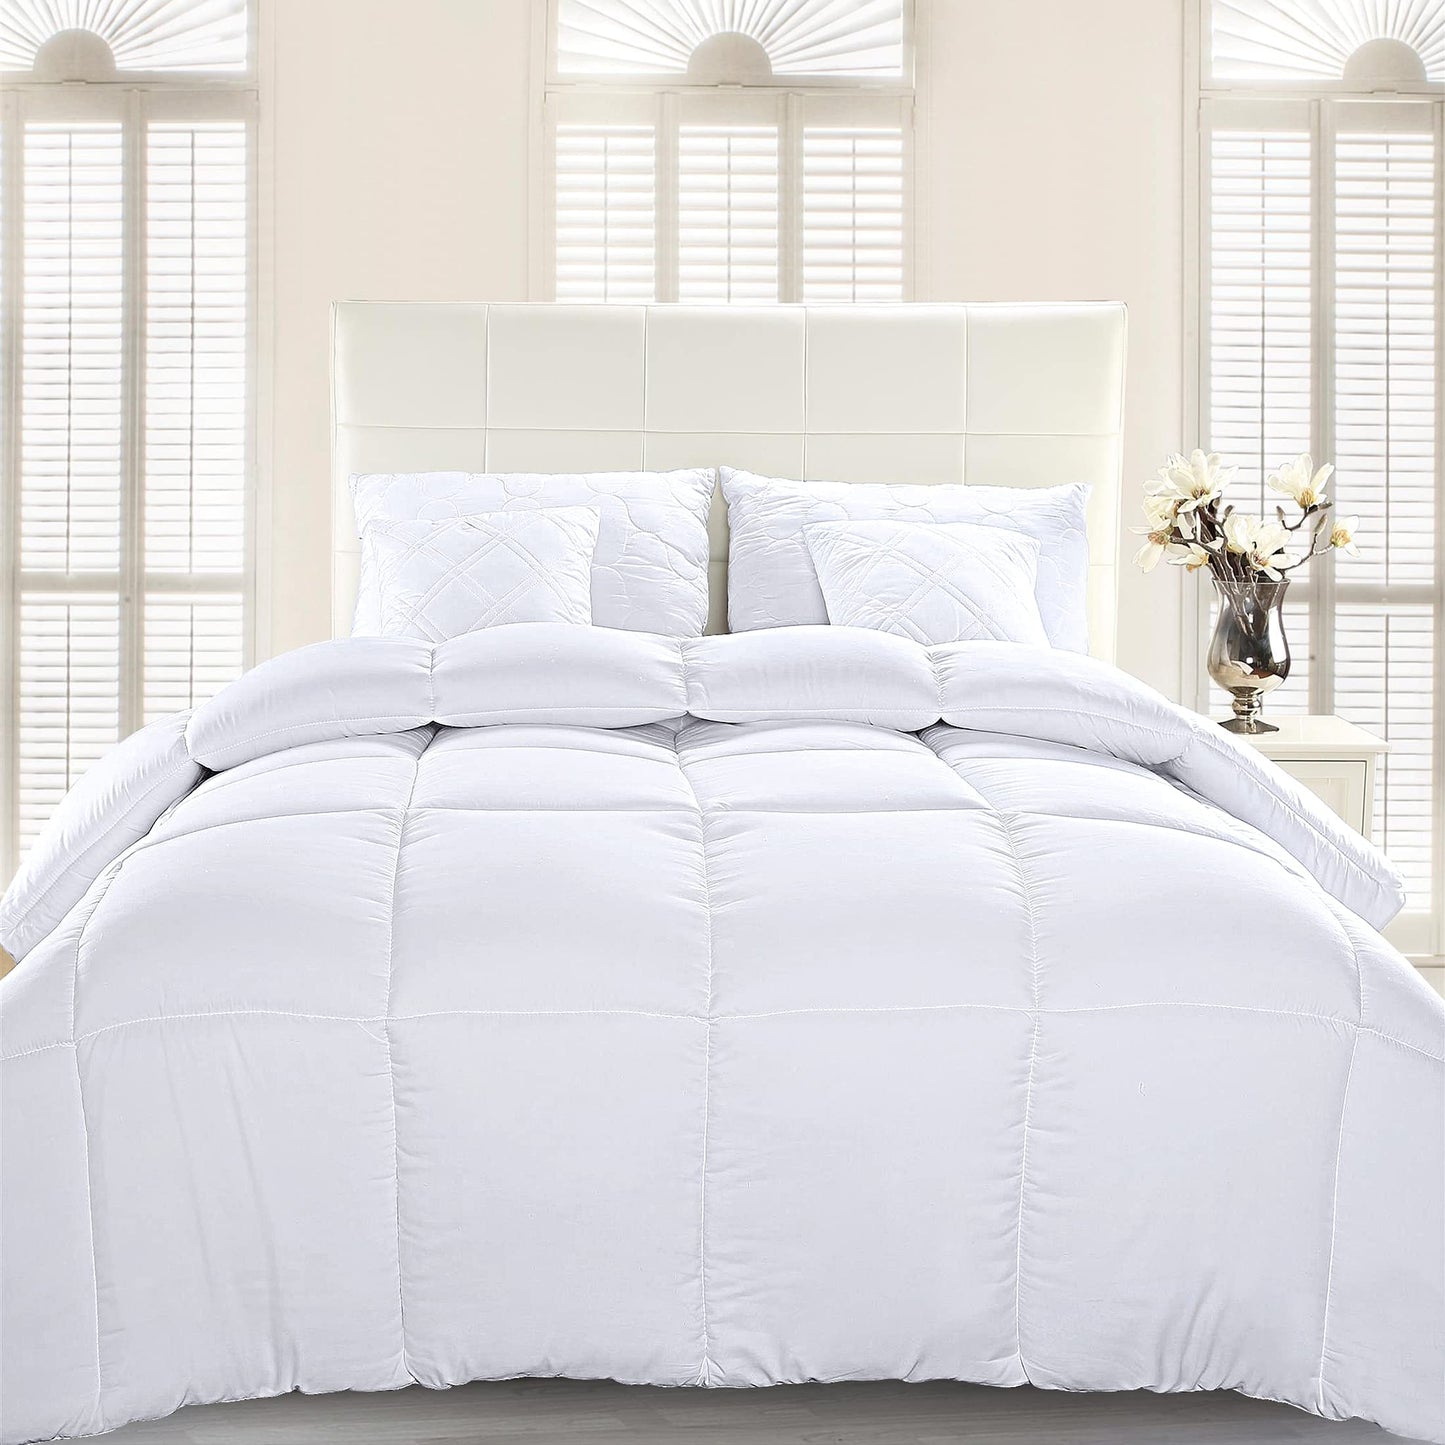 Quilted Comforter Duvet Insert - Box Stitched Down Alternative with Corner Tabs - Available in Various Colors